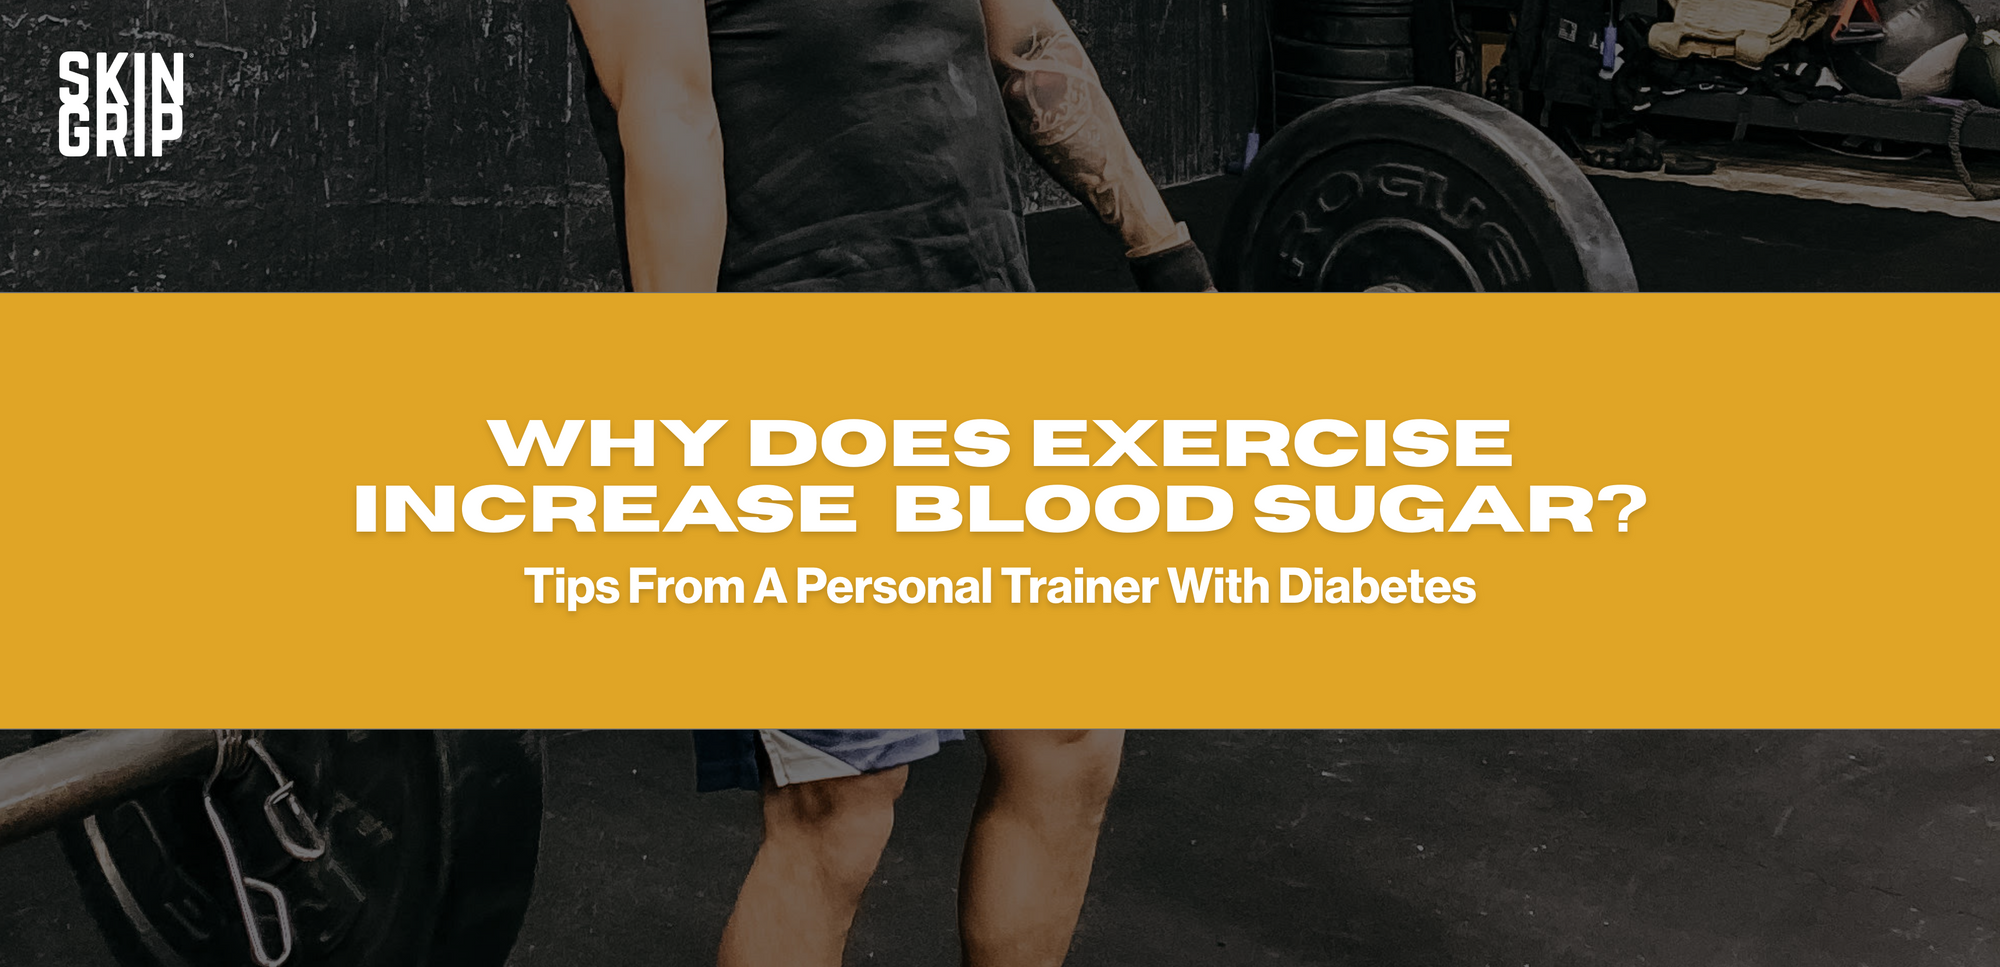 Why Does Exercise Increase Blood Sugar?: Tips From a Personal Trainer With Diabetes